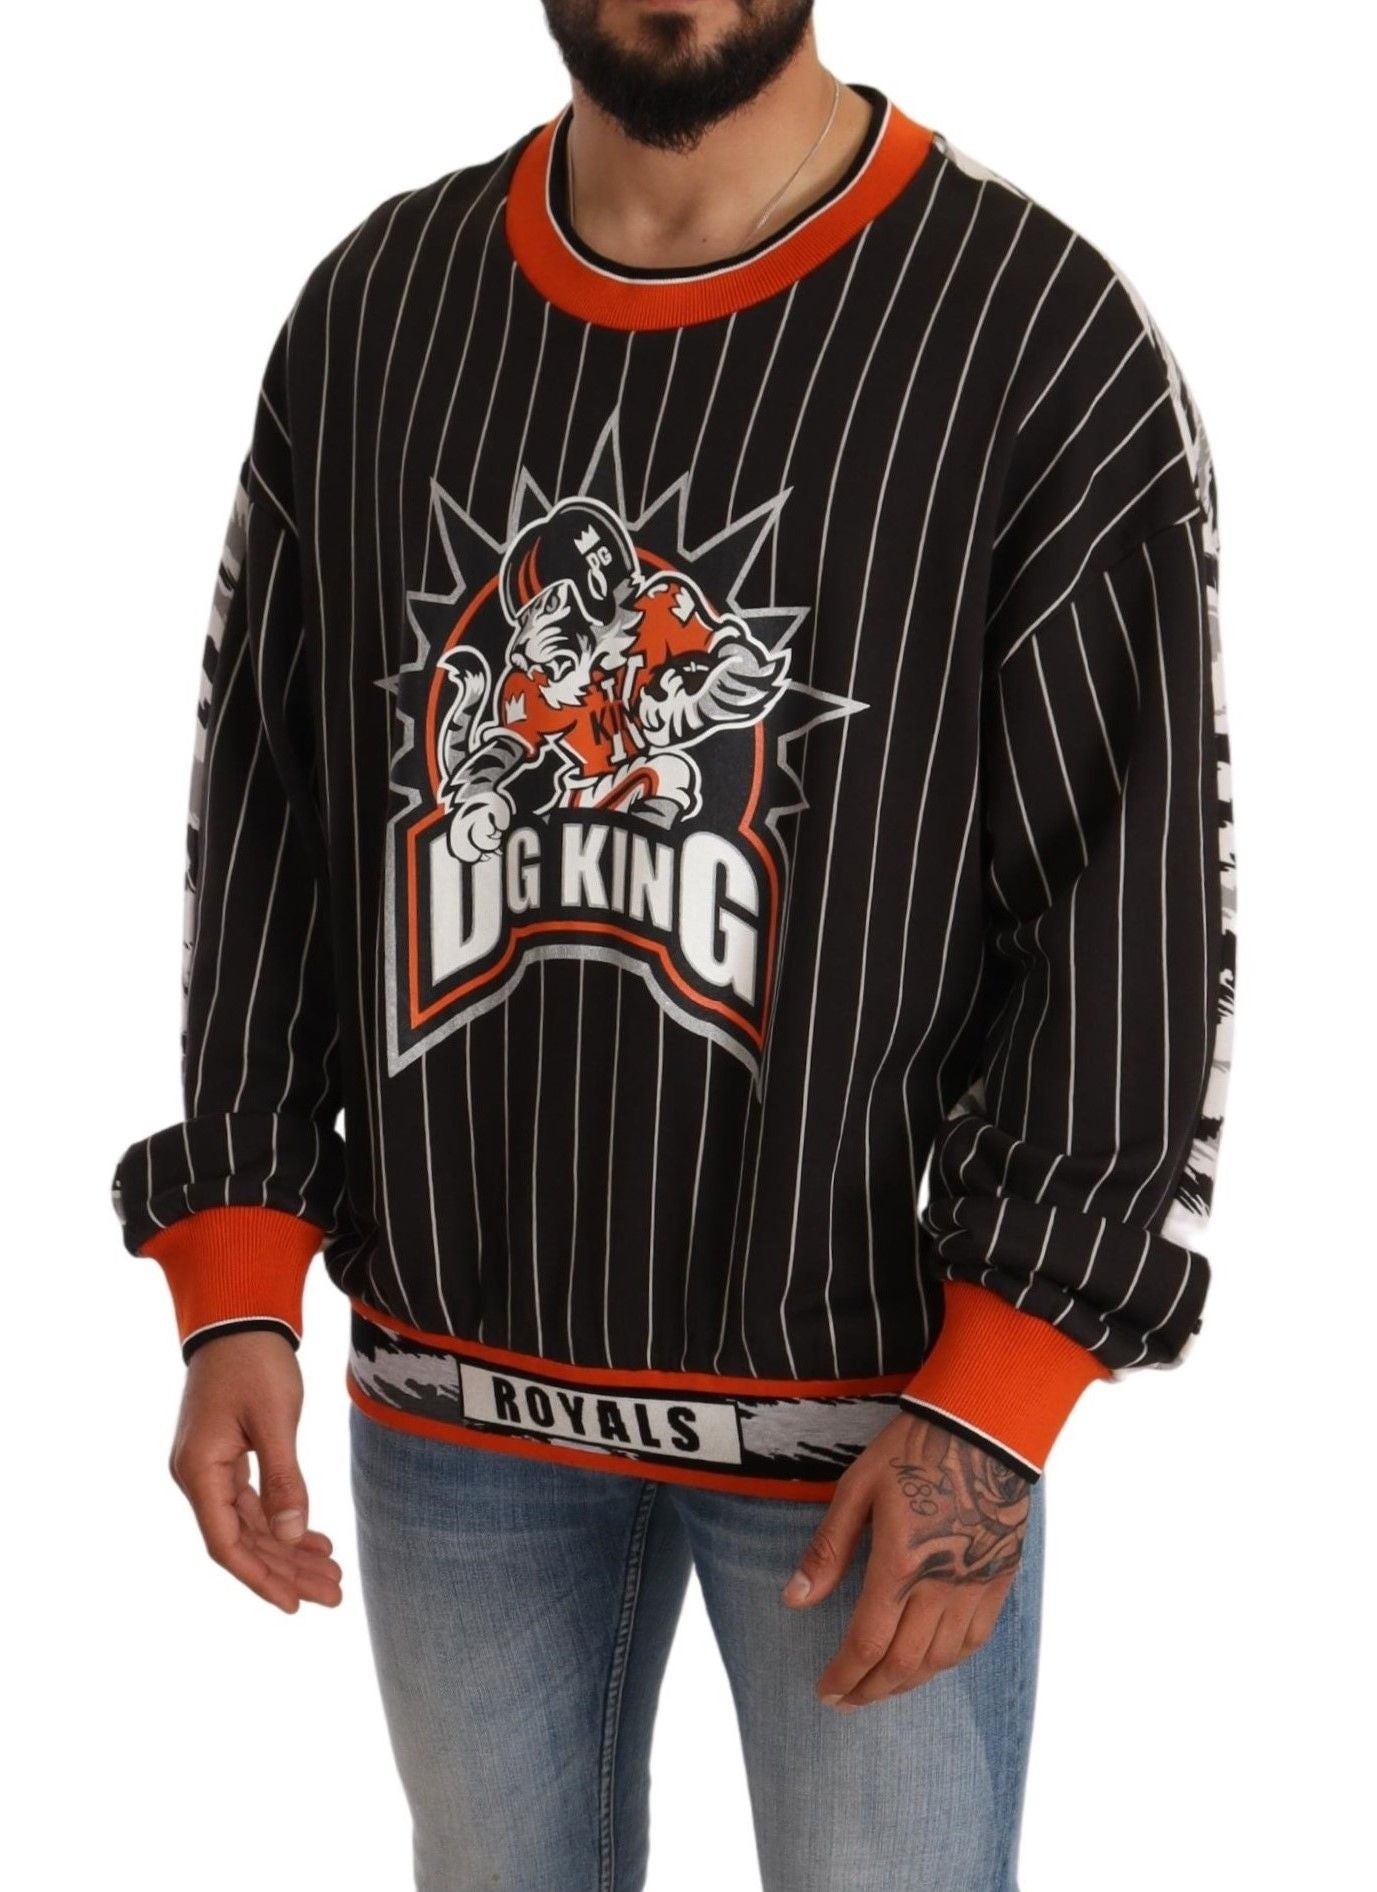 Exclusive Black Striped DG KING Sweater